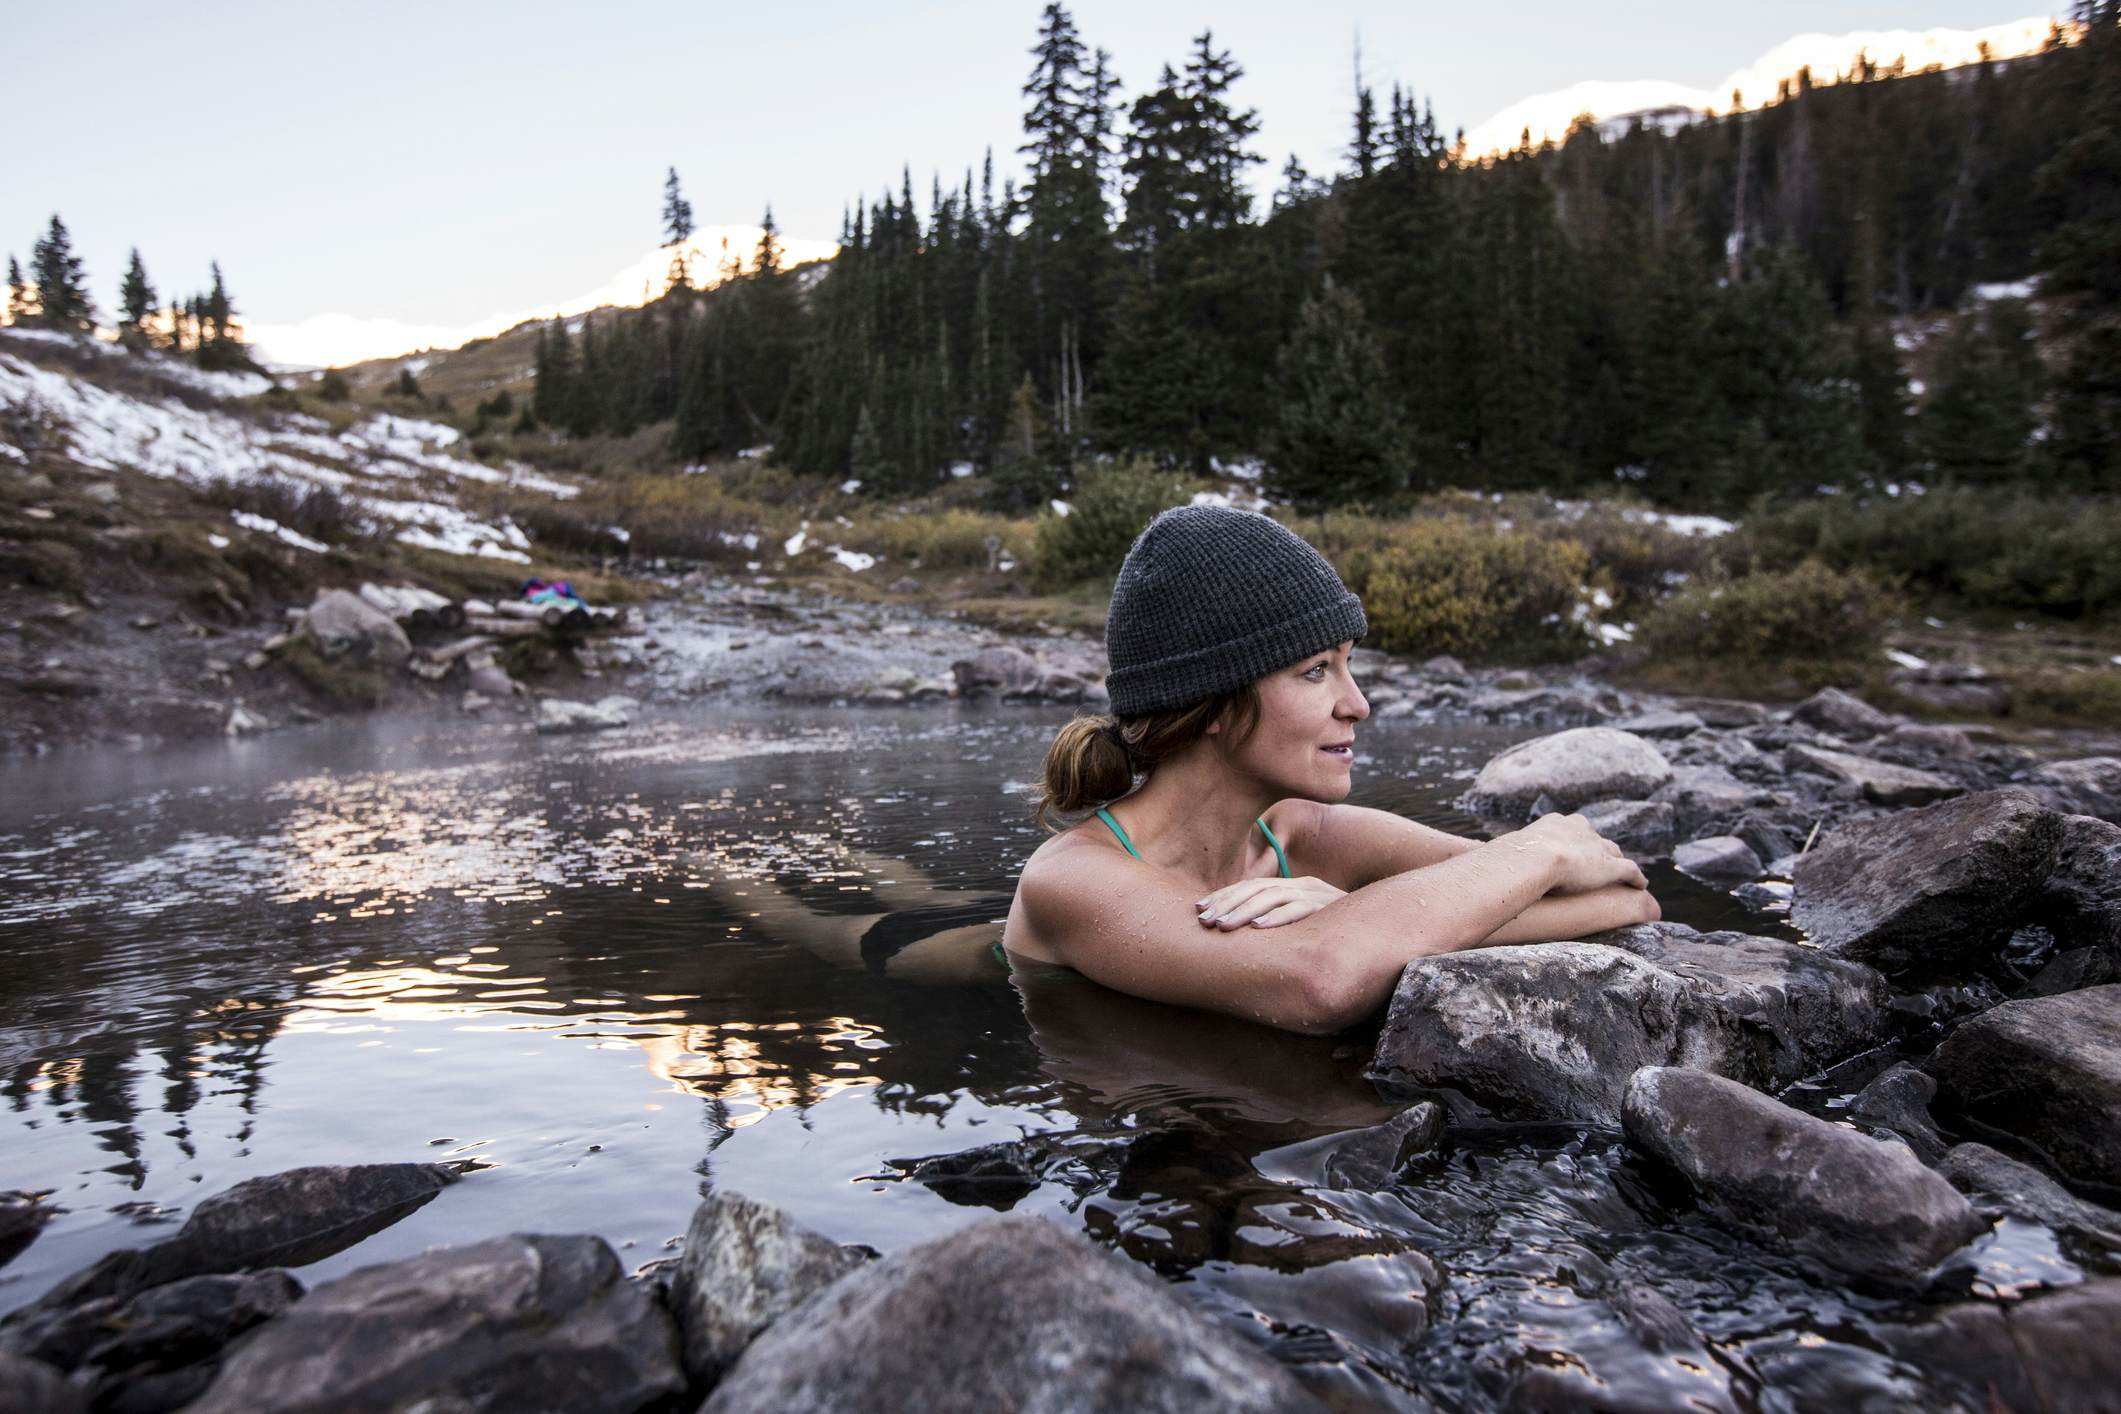 8 Best Hot Springs in Colorado With Stunning Mountain Views and